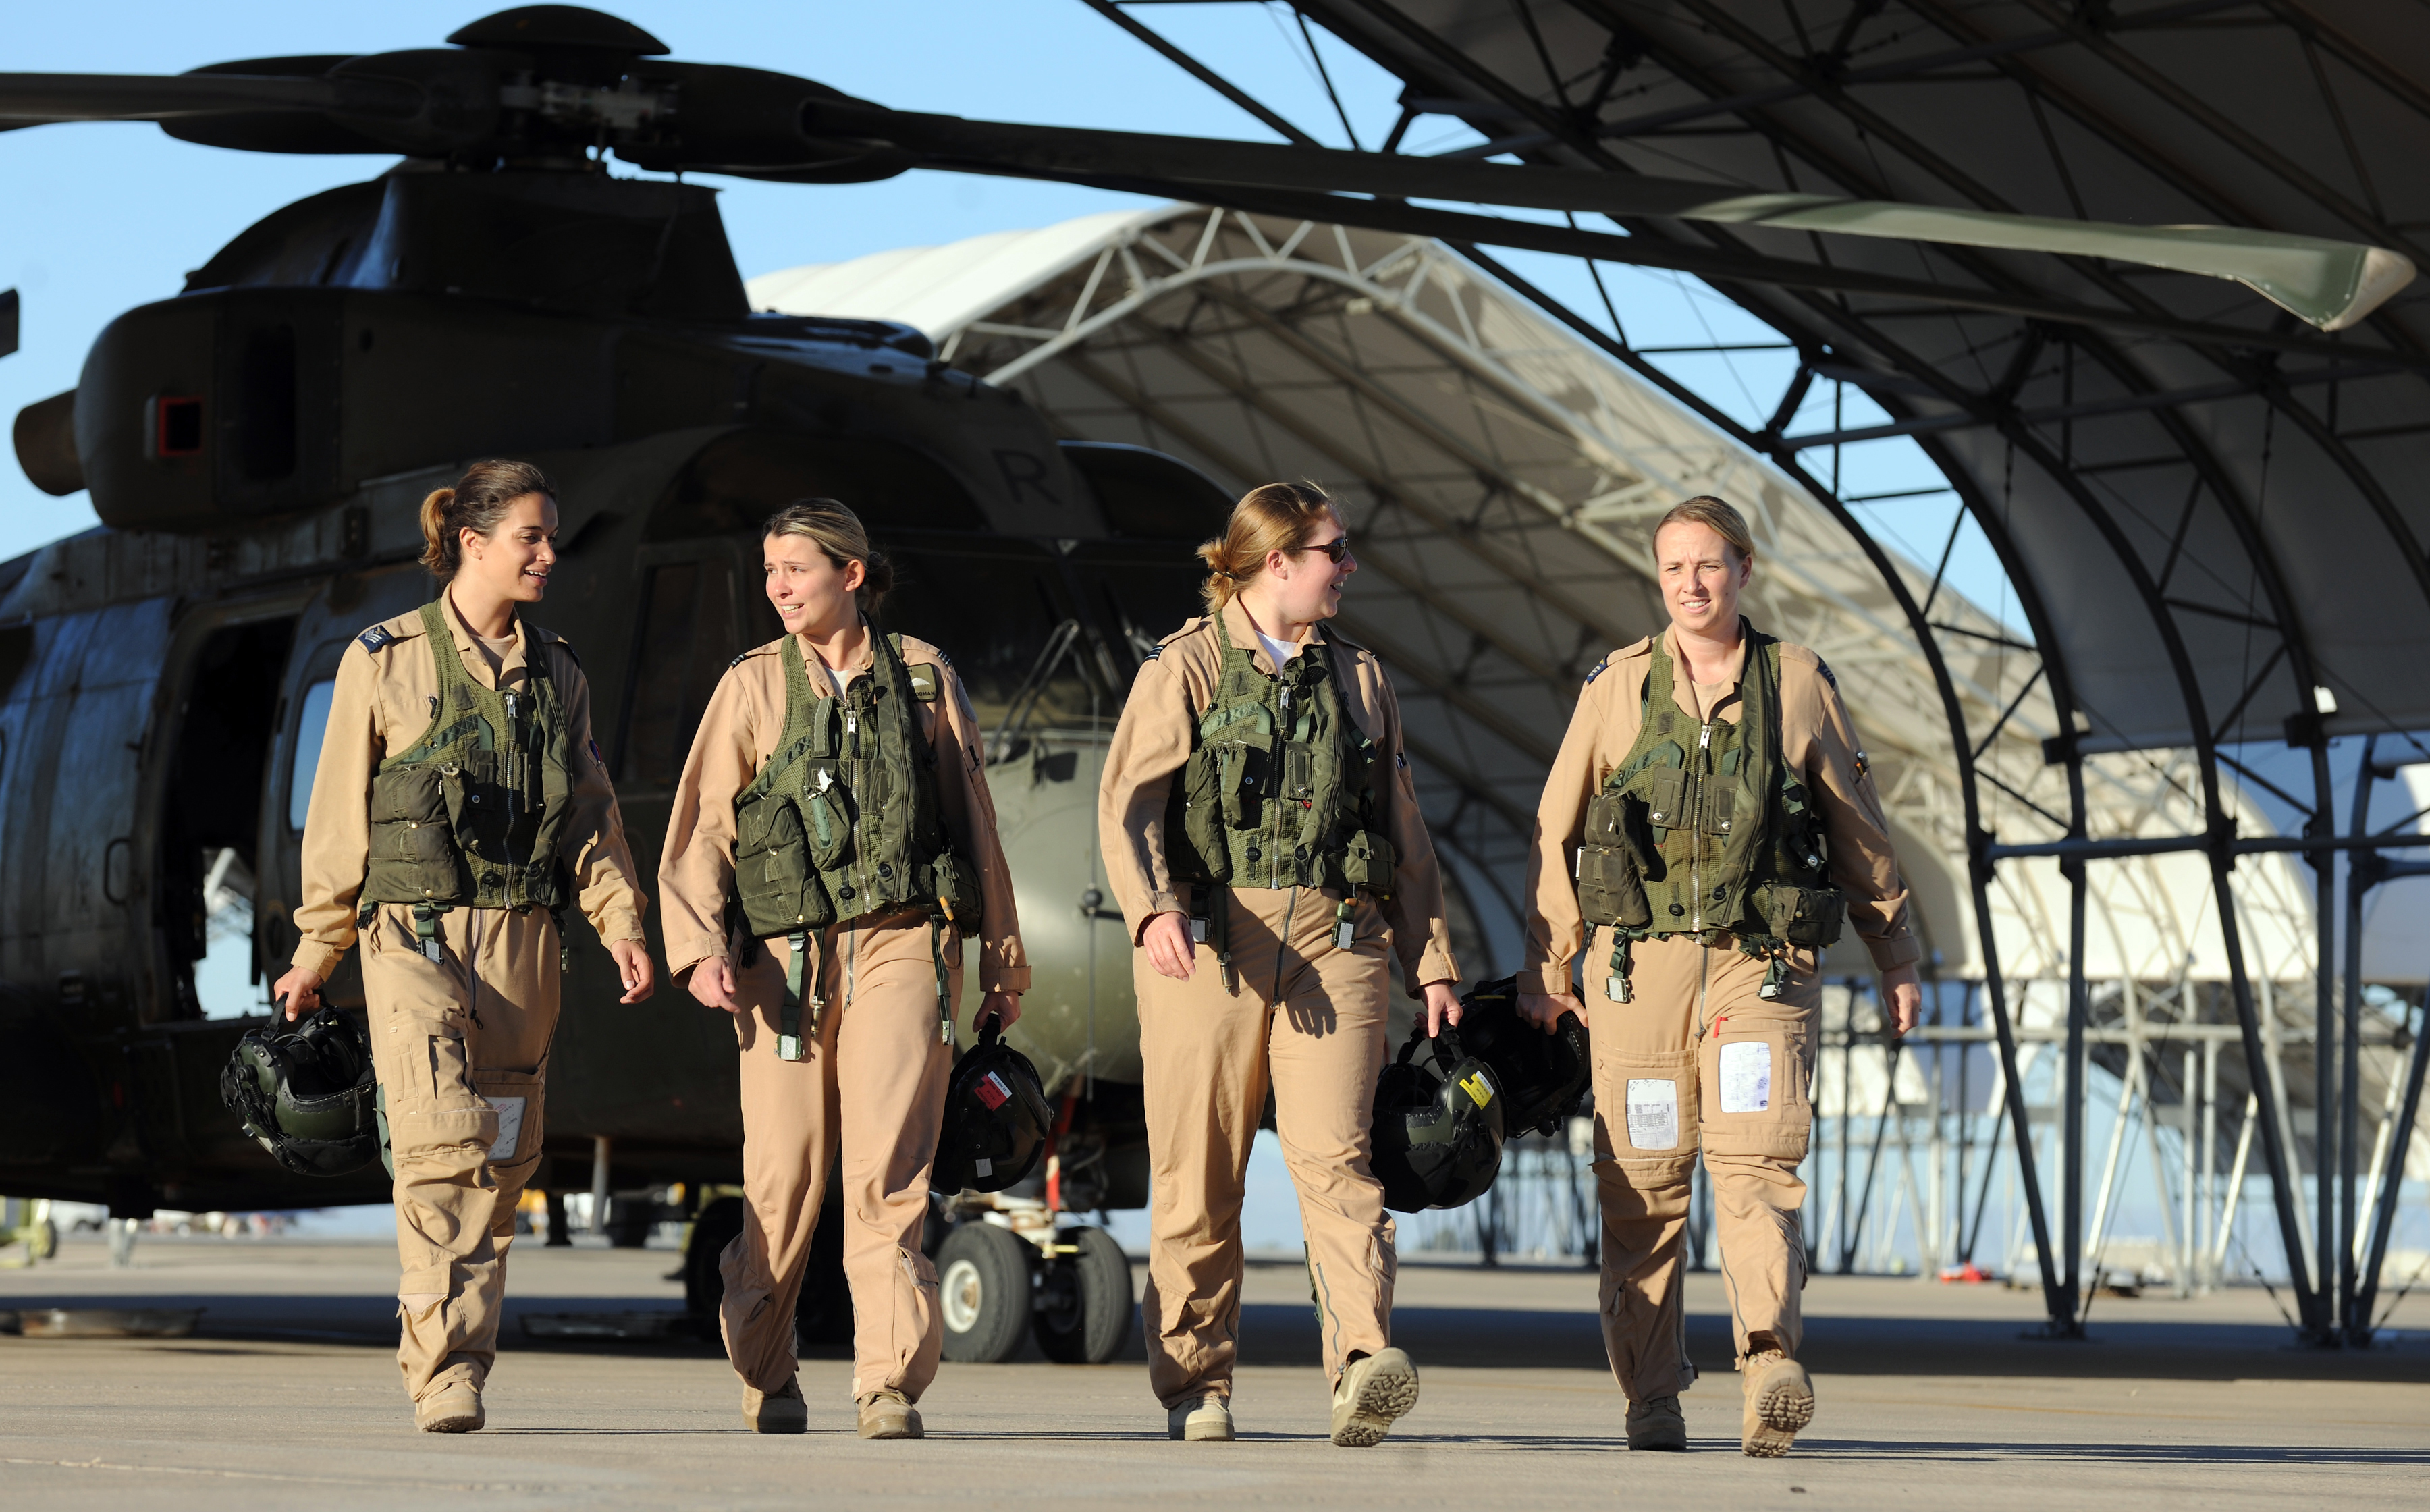 Image shows RAF Women Pilots walking in a line on airfield